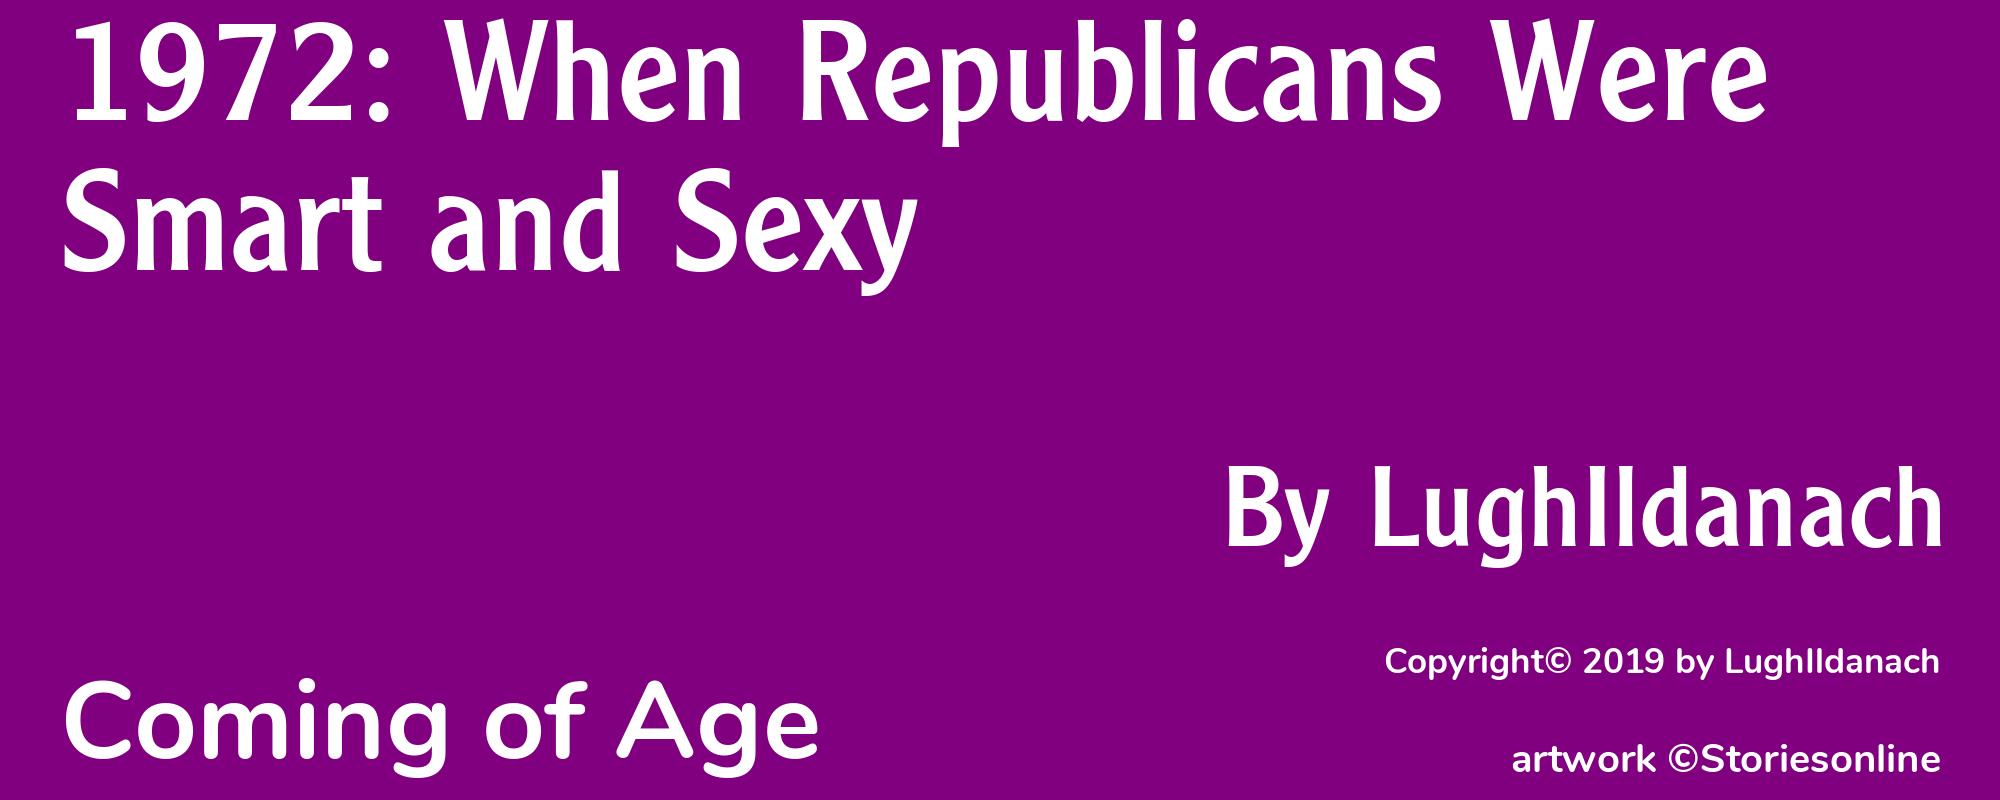 1972: When Republicans Were Smart and Sexy - Cover